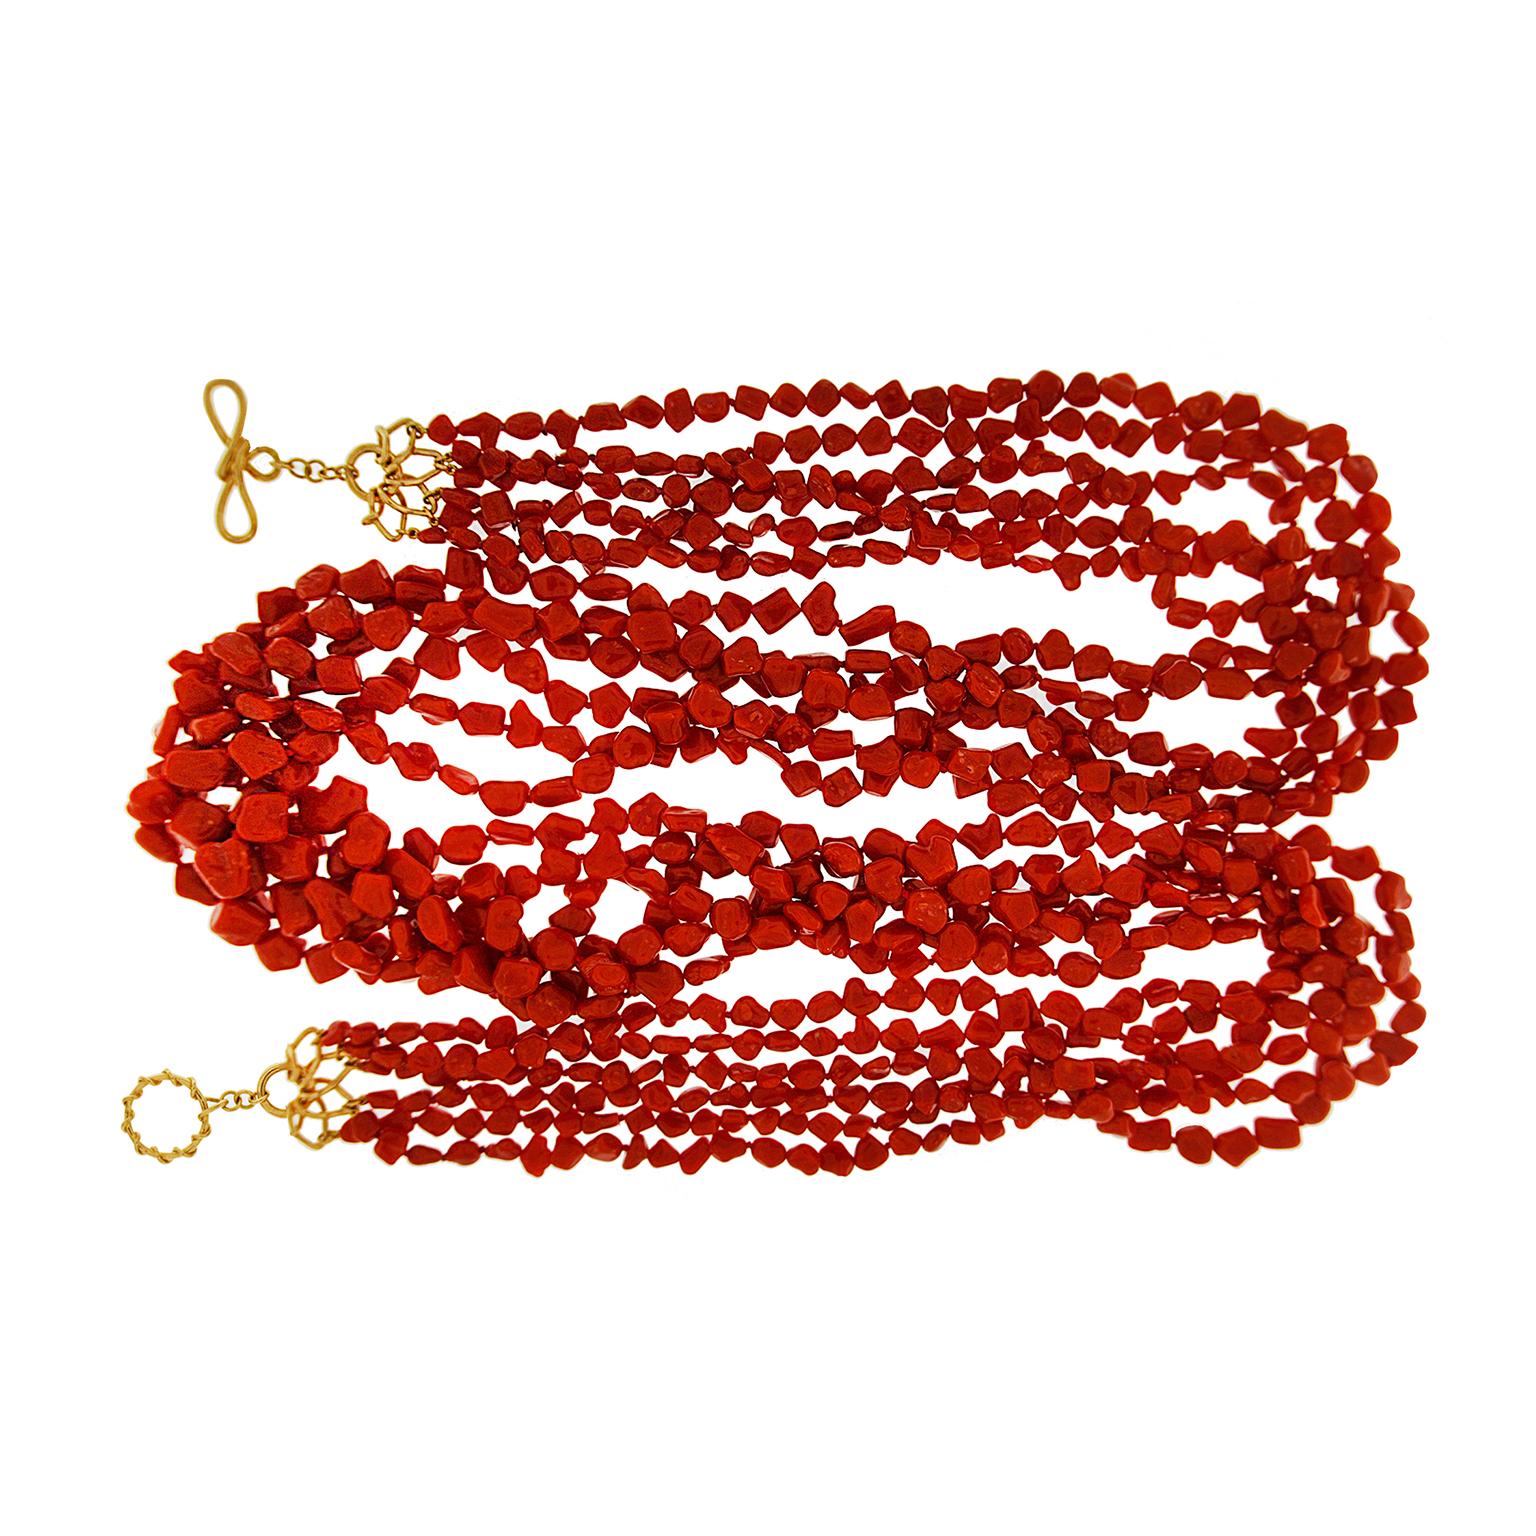 Valentin Magro Multi Strand Sardinian Red Coral Nugget Necklace boasts an abundance of jewels. Deep red Sardinian coral is carved into hundreds of beads. The nugget-shaped pieces range from miniscule at the ends to bold sizes in the center.